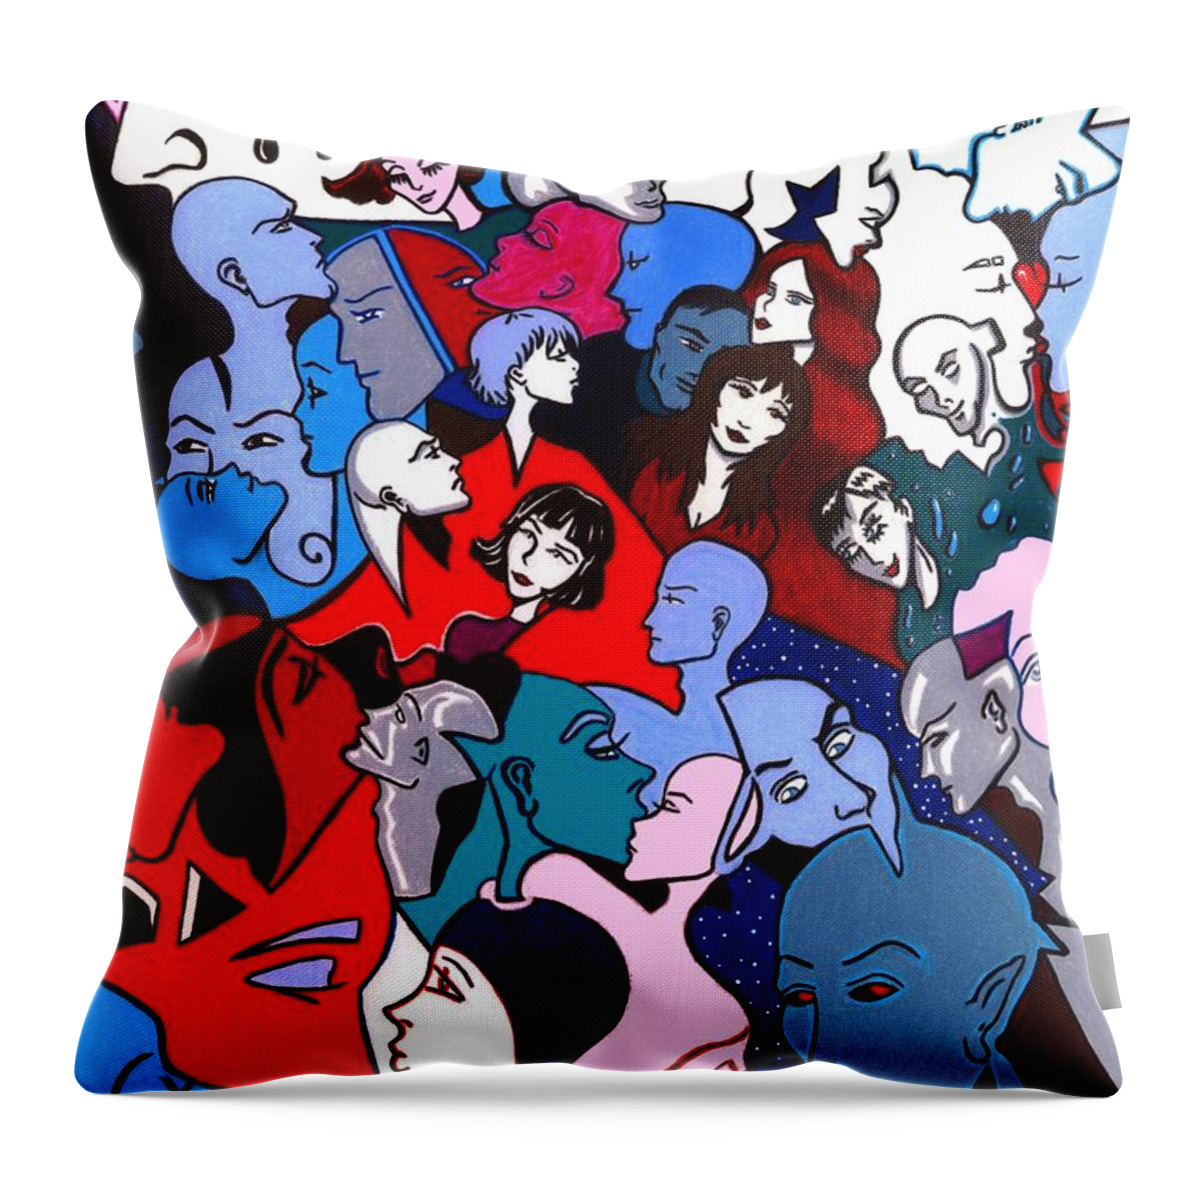 Faces Throw Pillow featuring the drawing A Fragile Ecosystem of Dependency by Danielle R T Haney